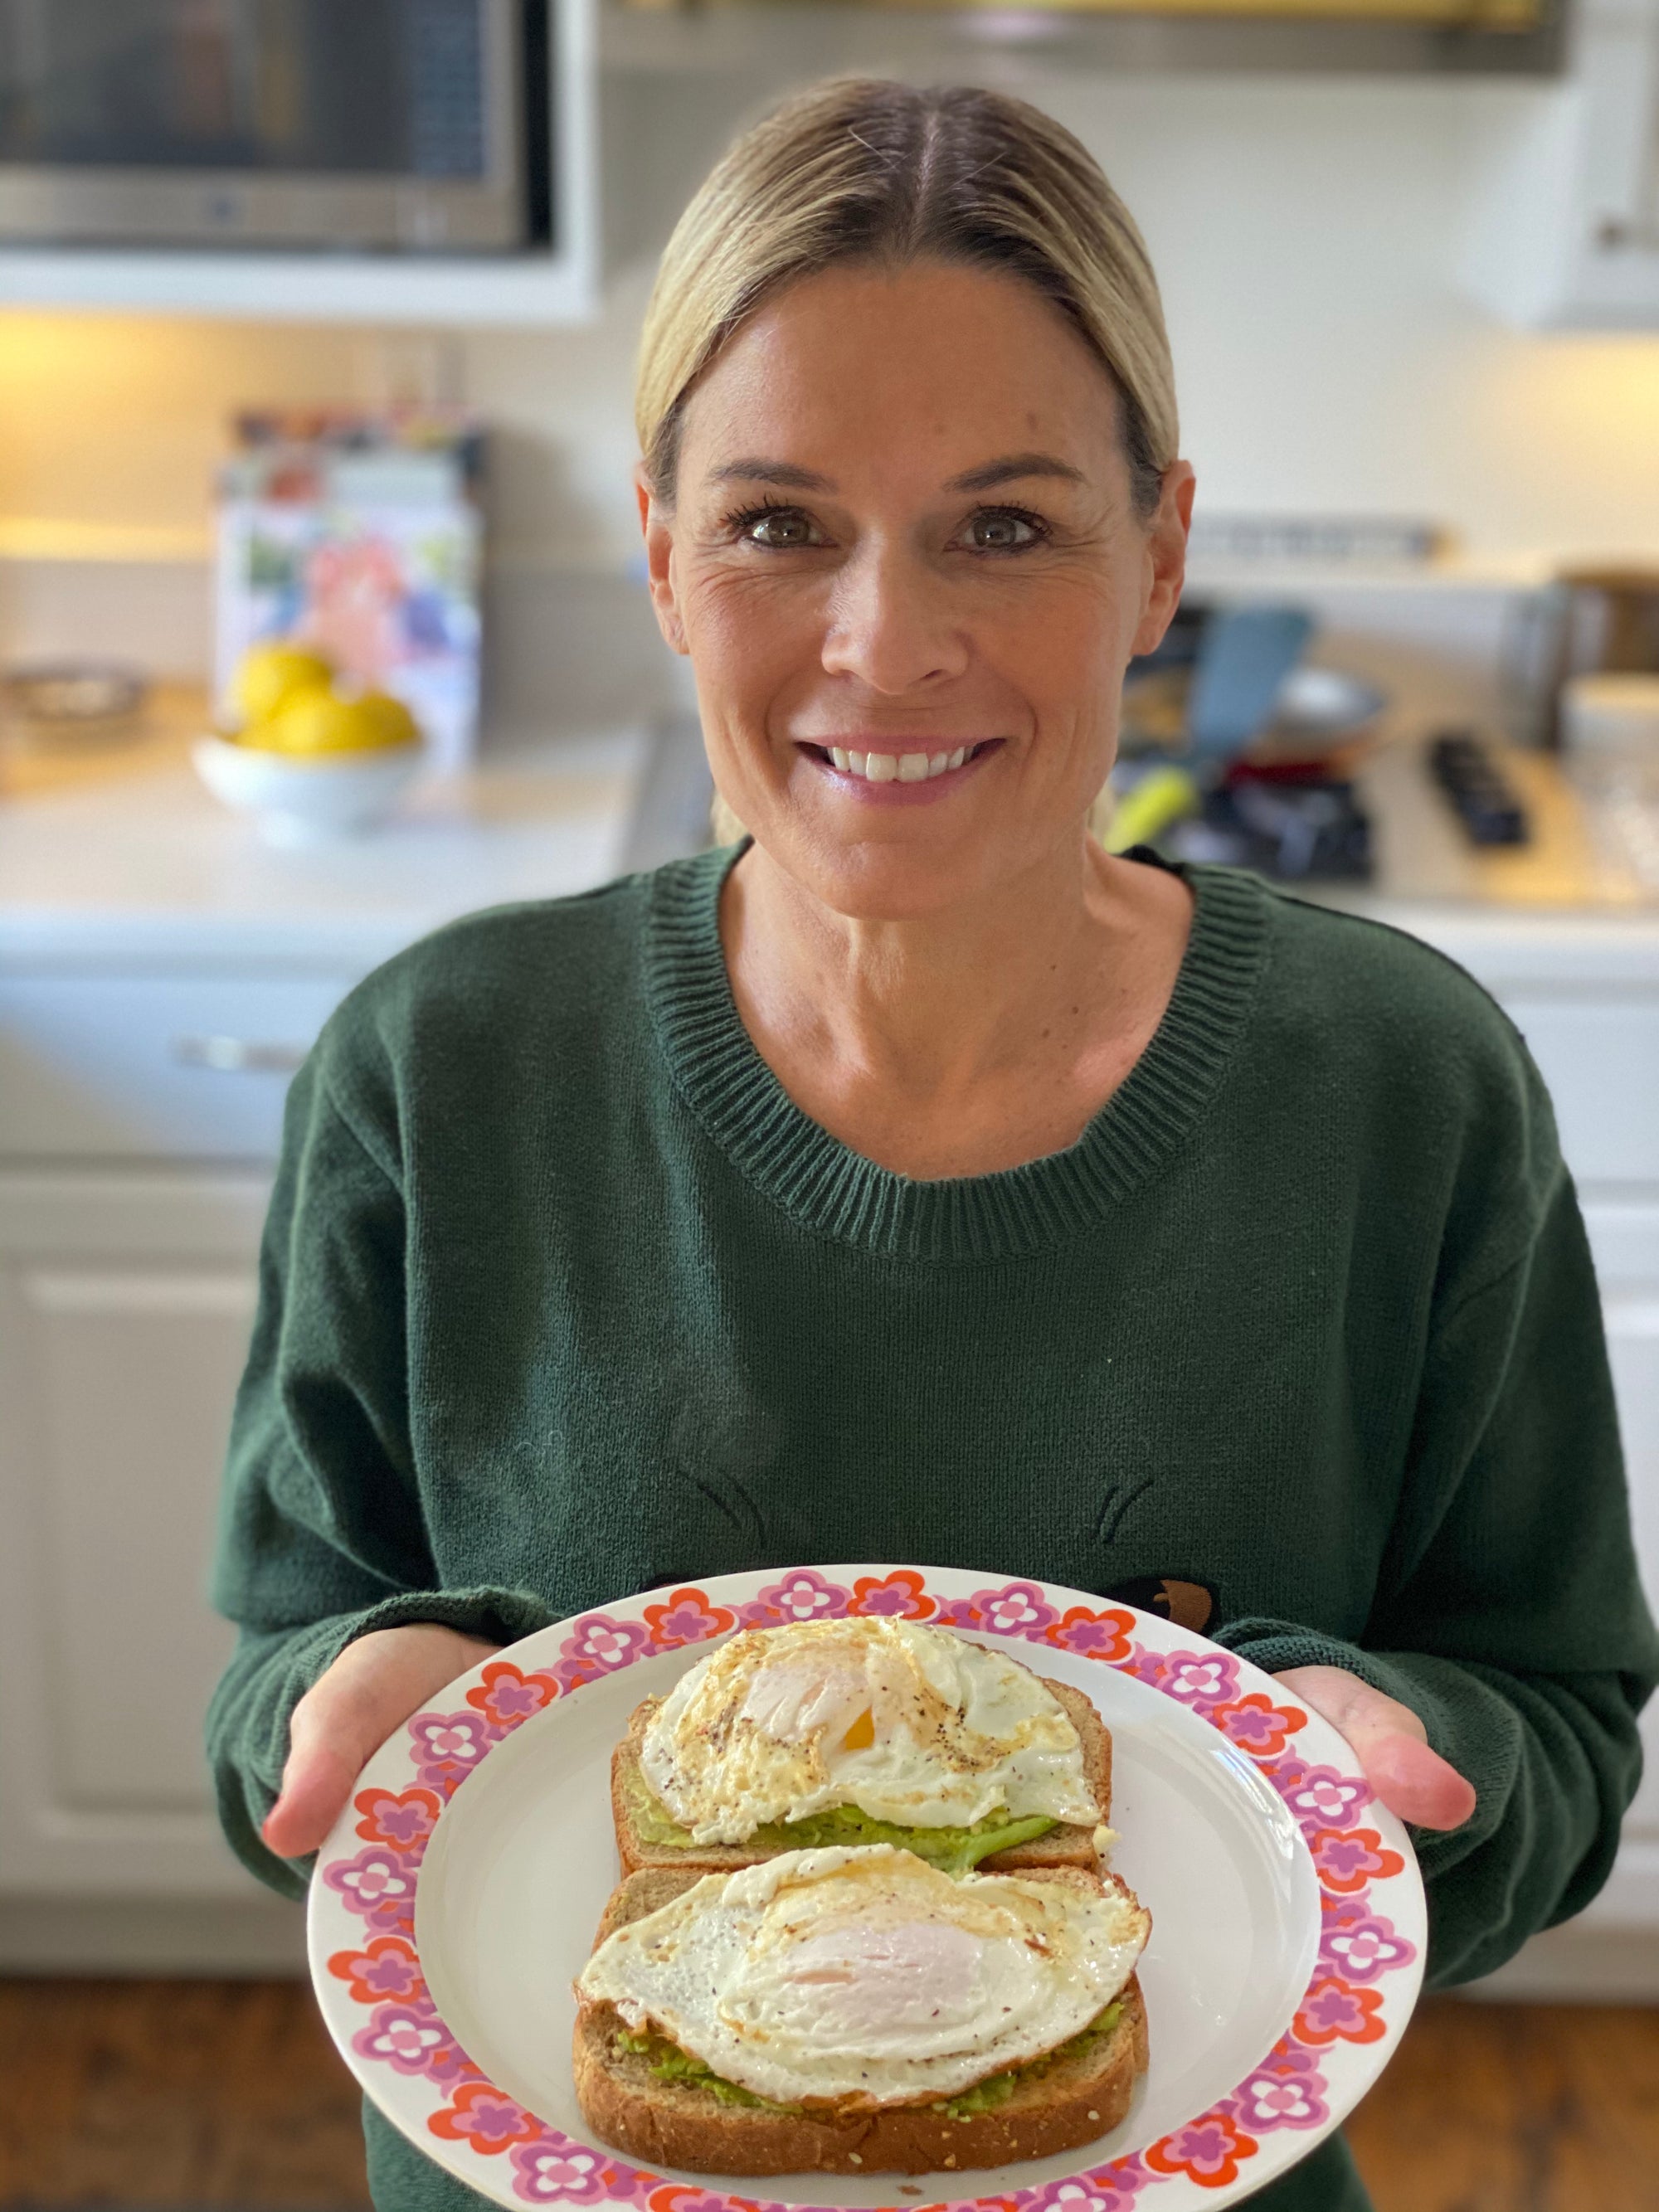 Cat Cora’s Avocado Toast with an Over-Easy Egg